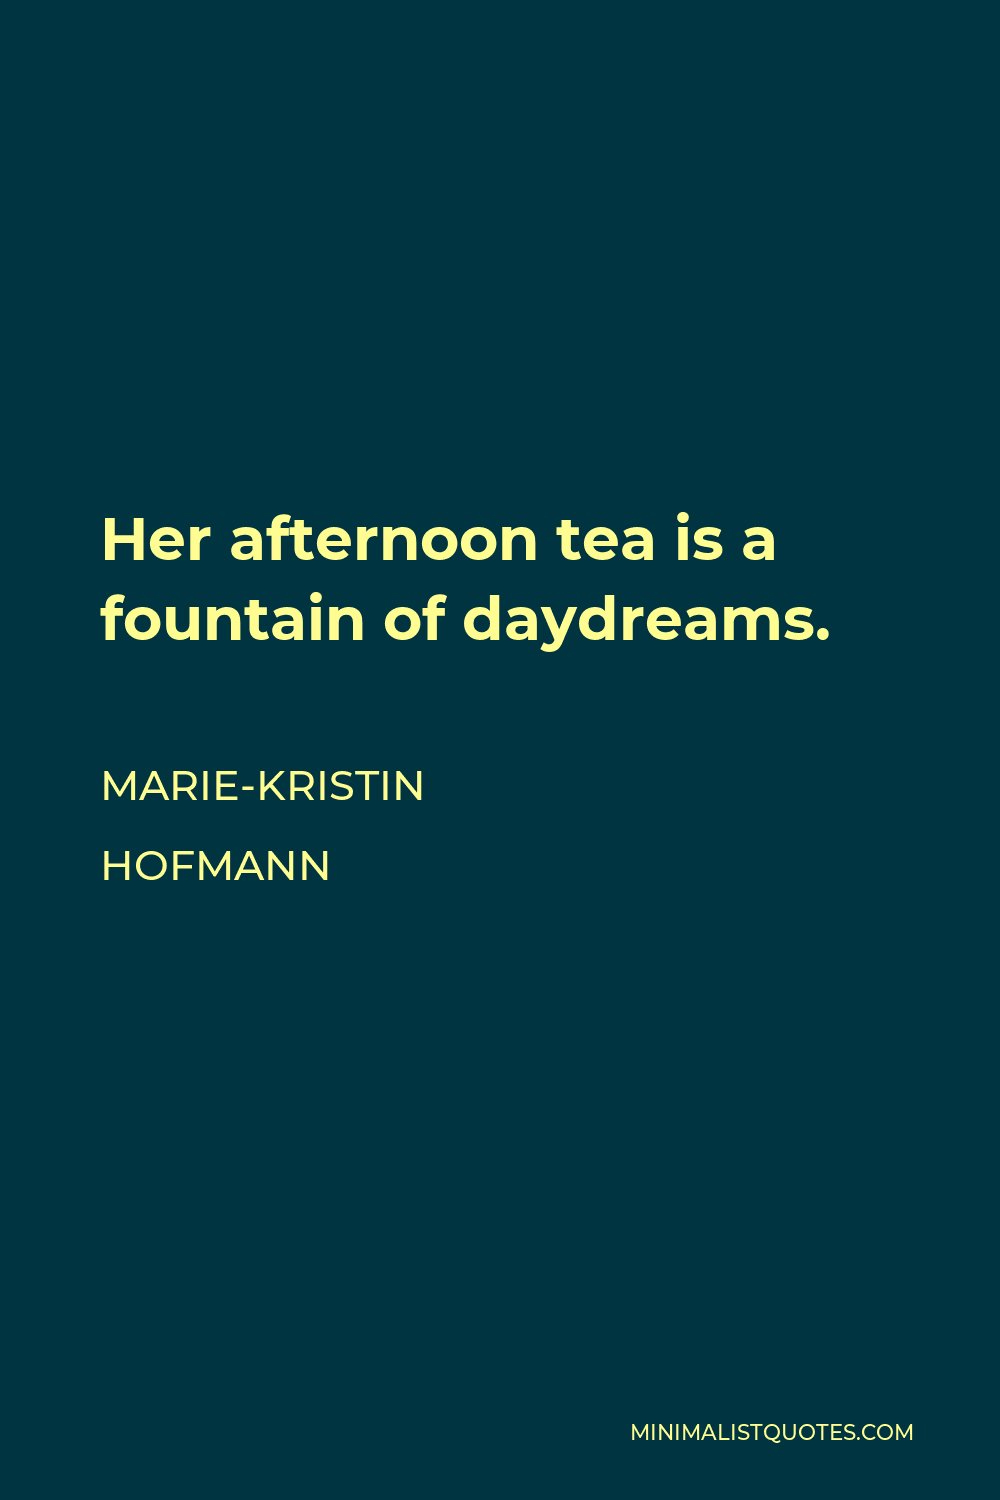 Marie-Kristin Hofmann Quote - Her afternoon tea is a fountain of daydreams.